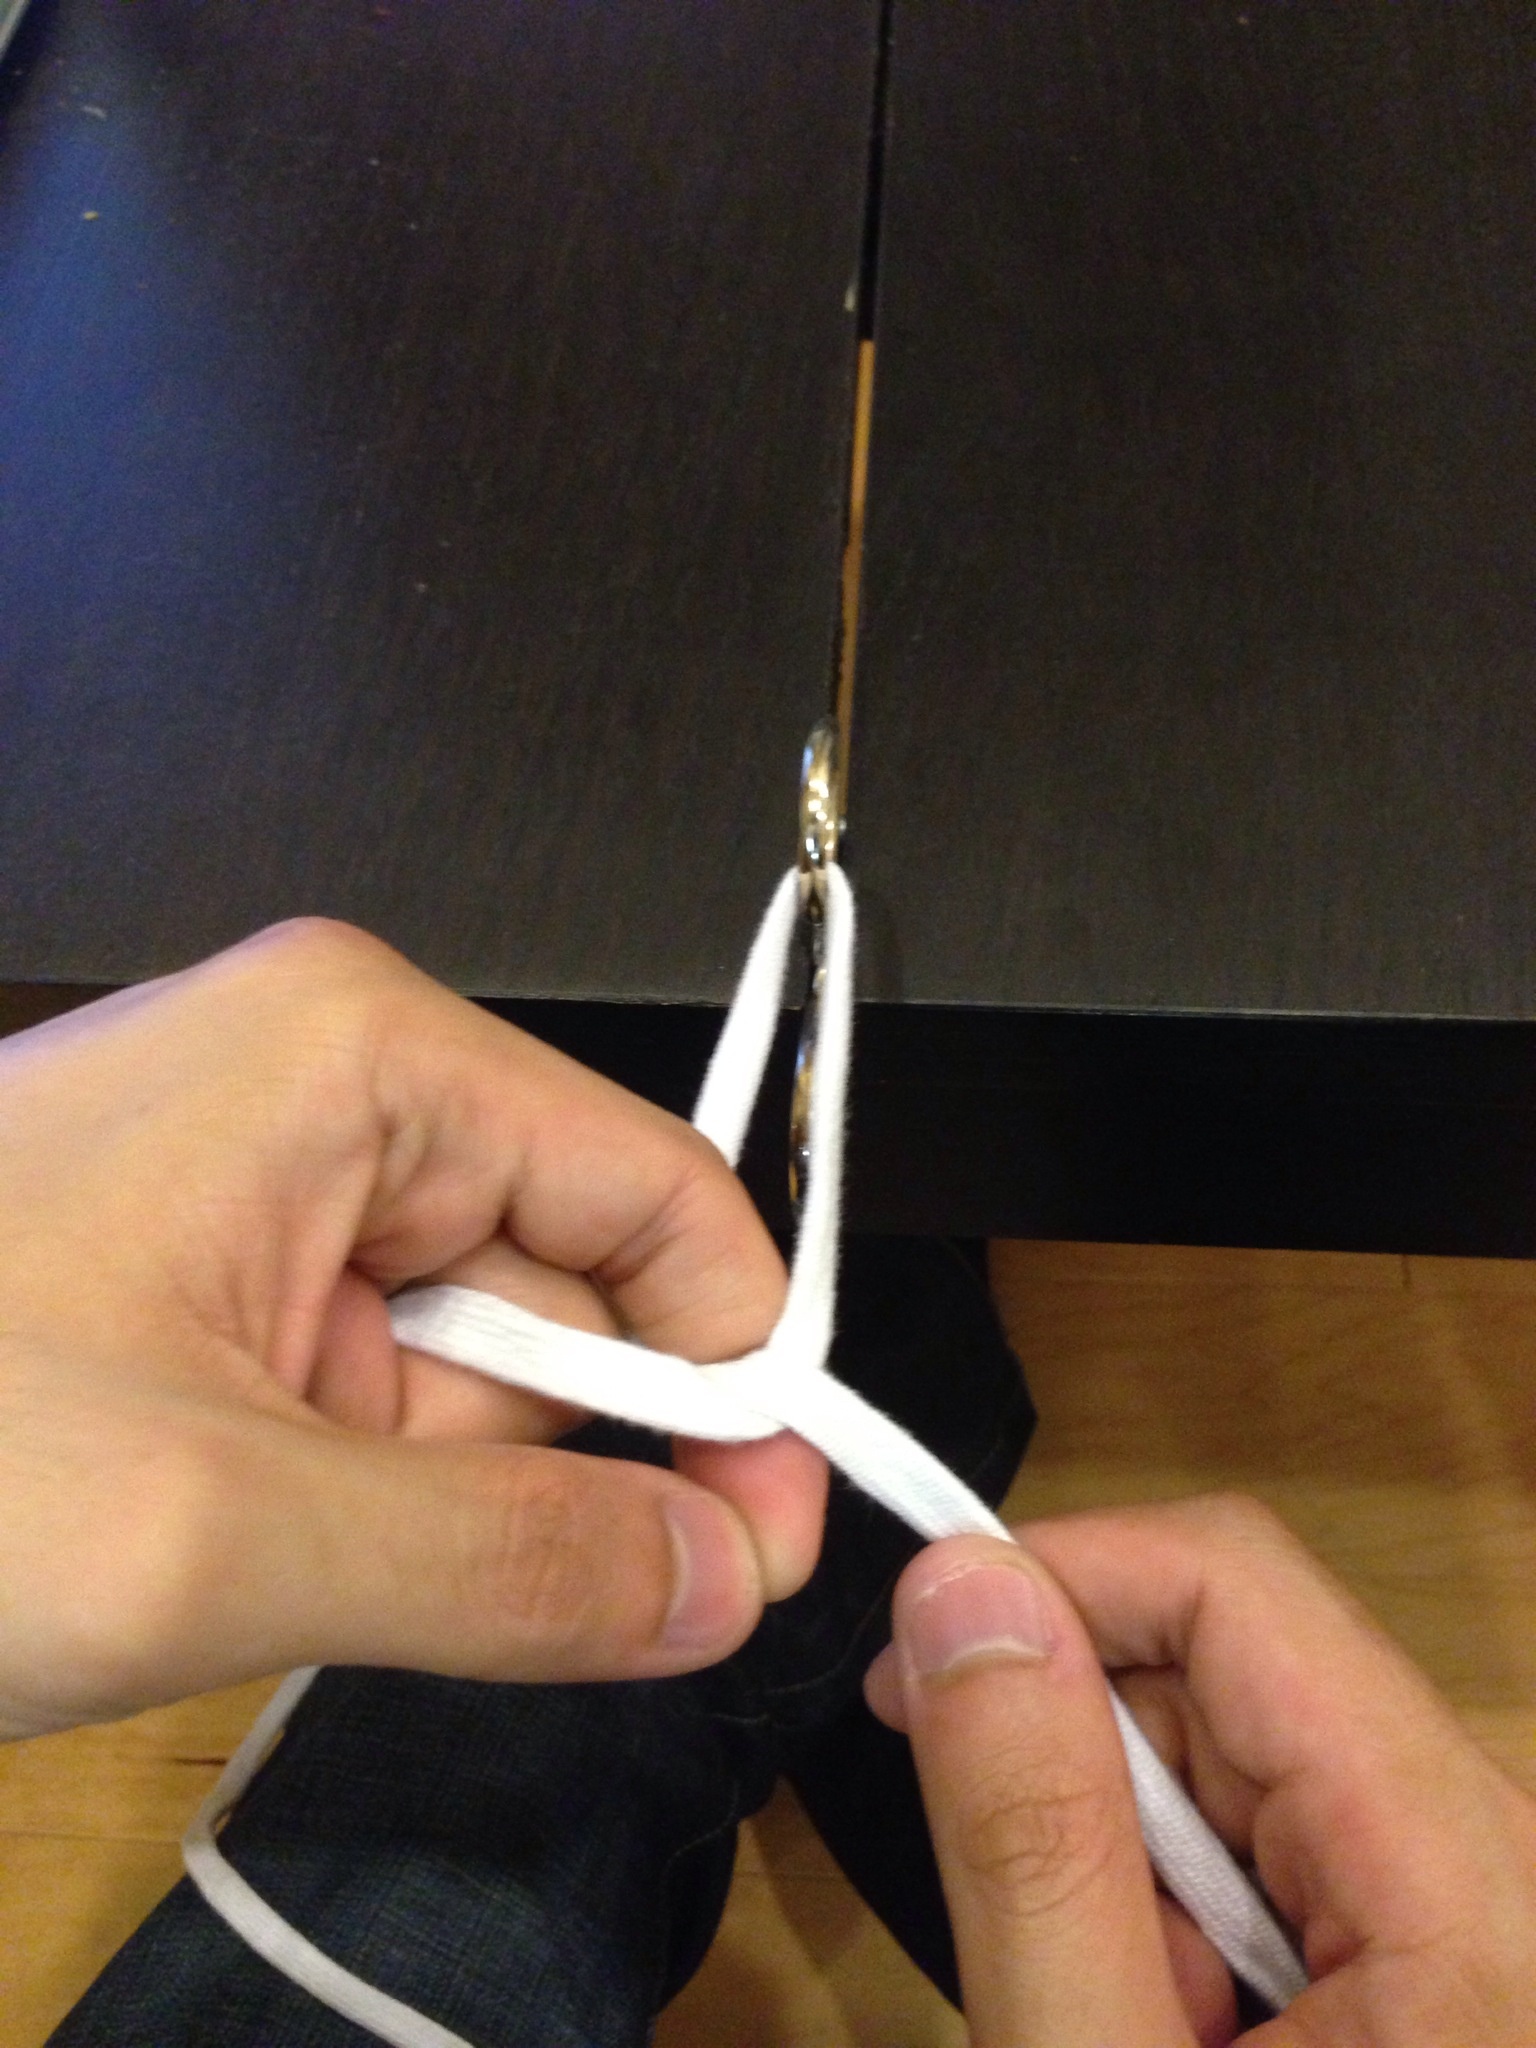 surgery knot tying 2 hand